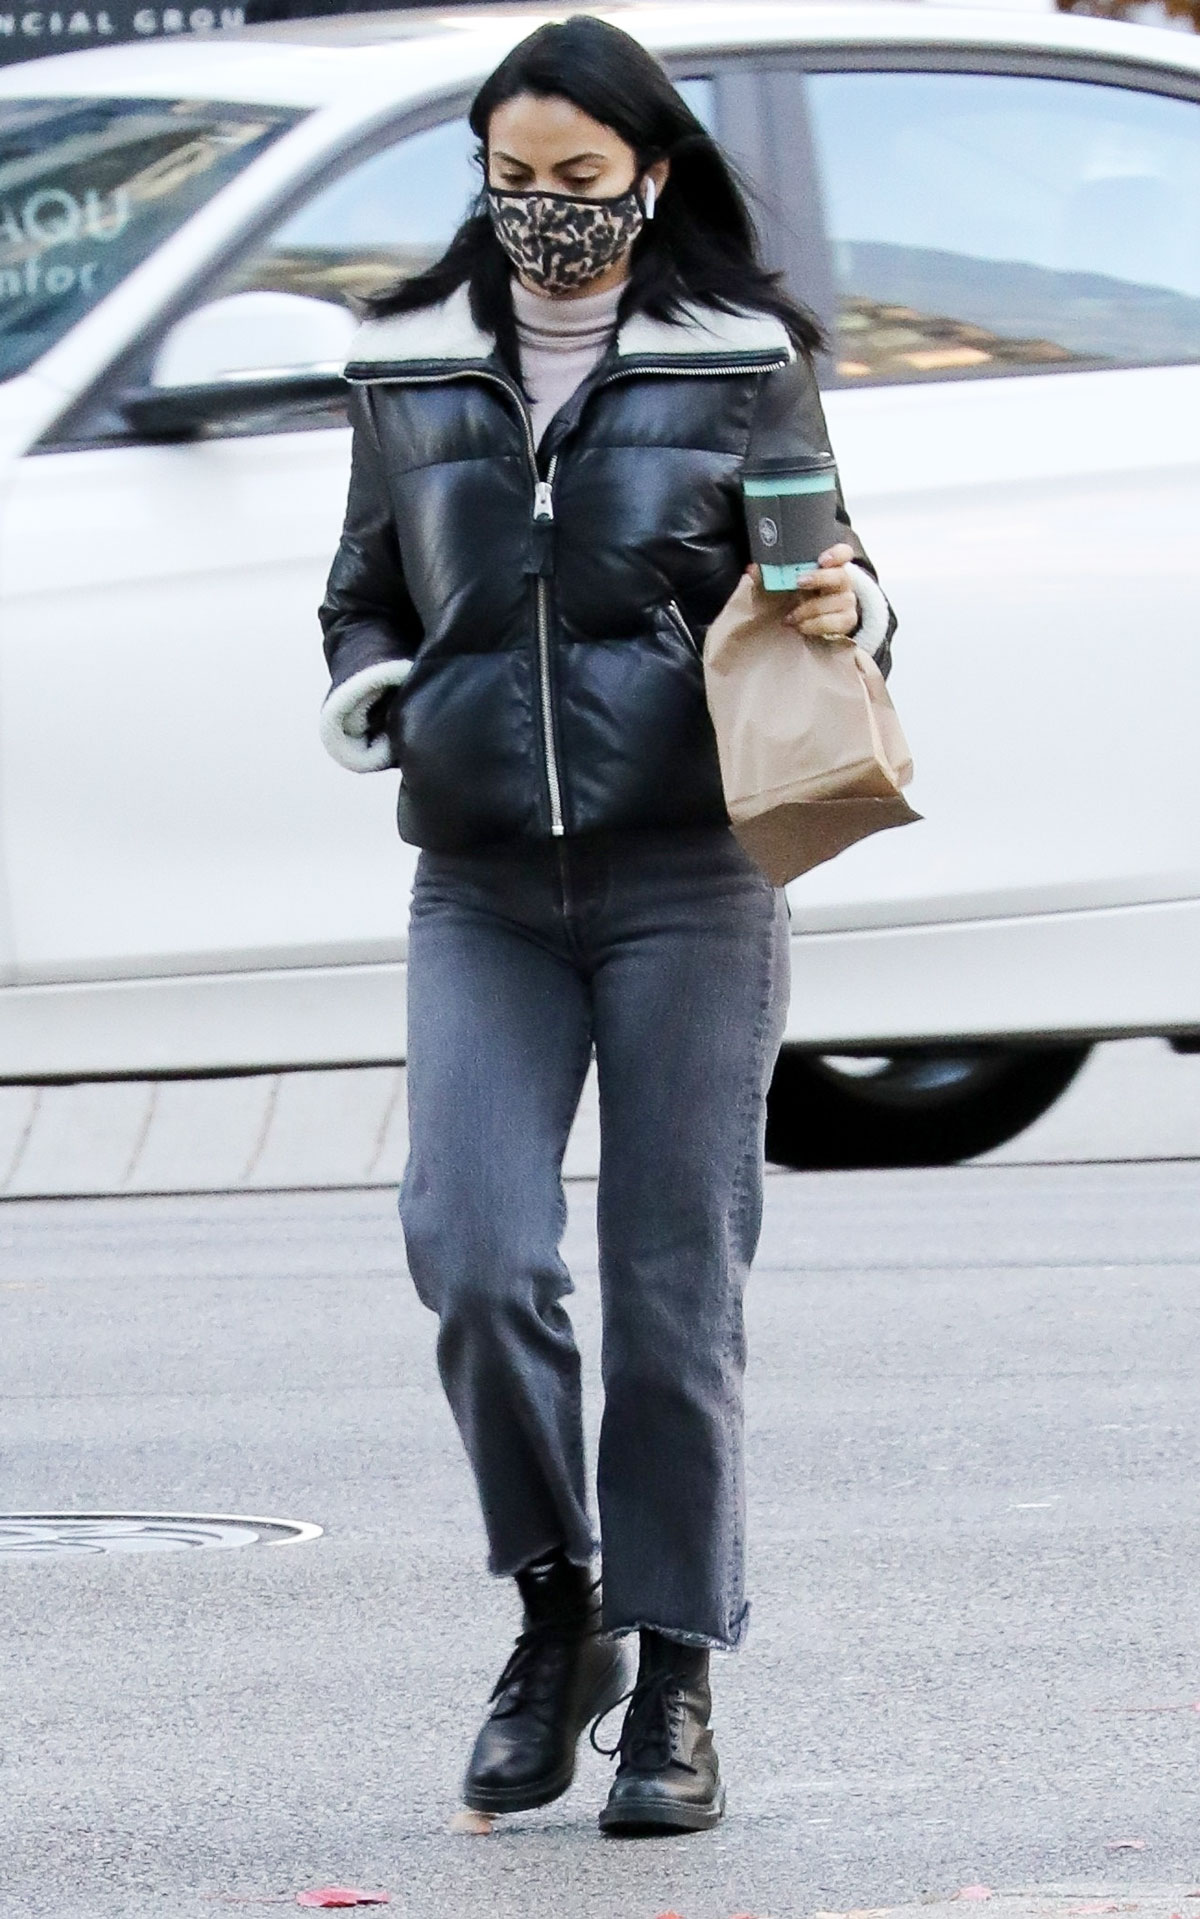 Camila Mendes Wearing a Black Puffer Jacket by Levi's available on Amazon